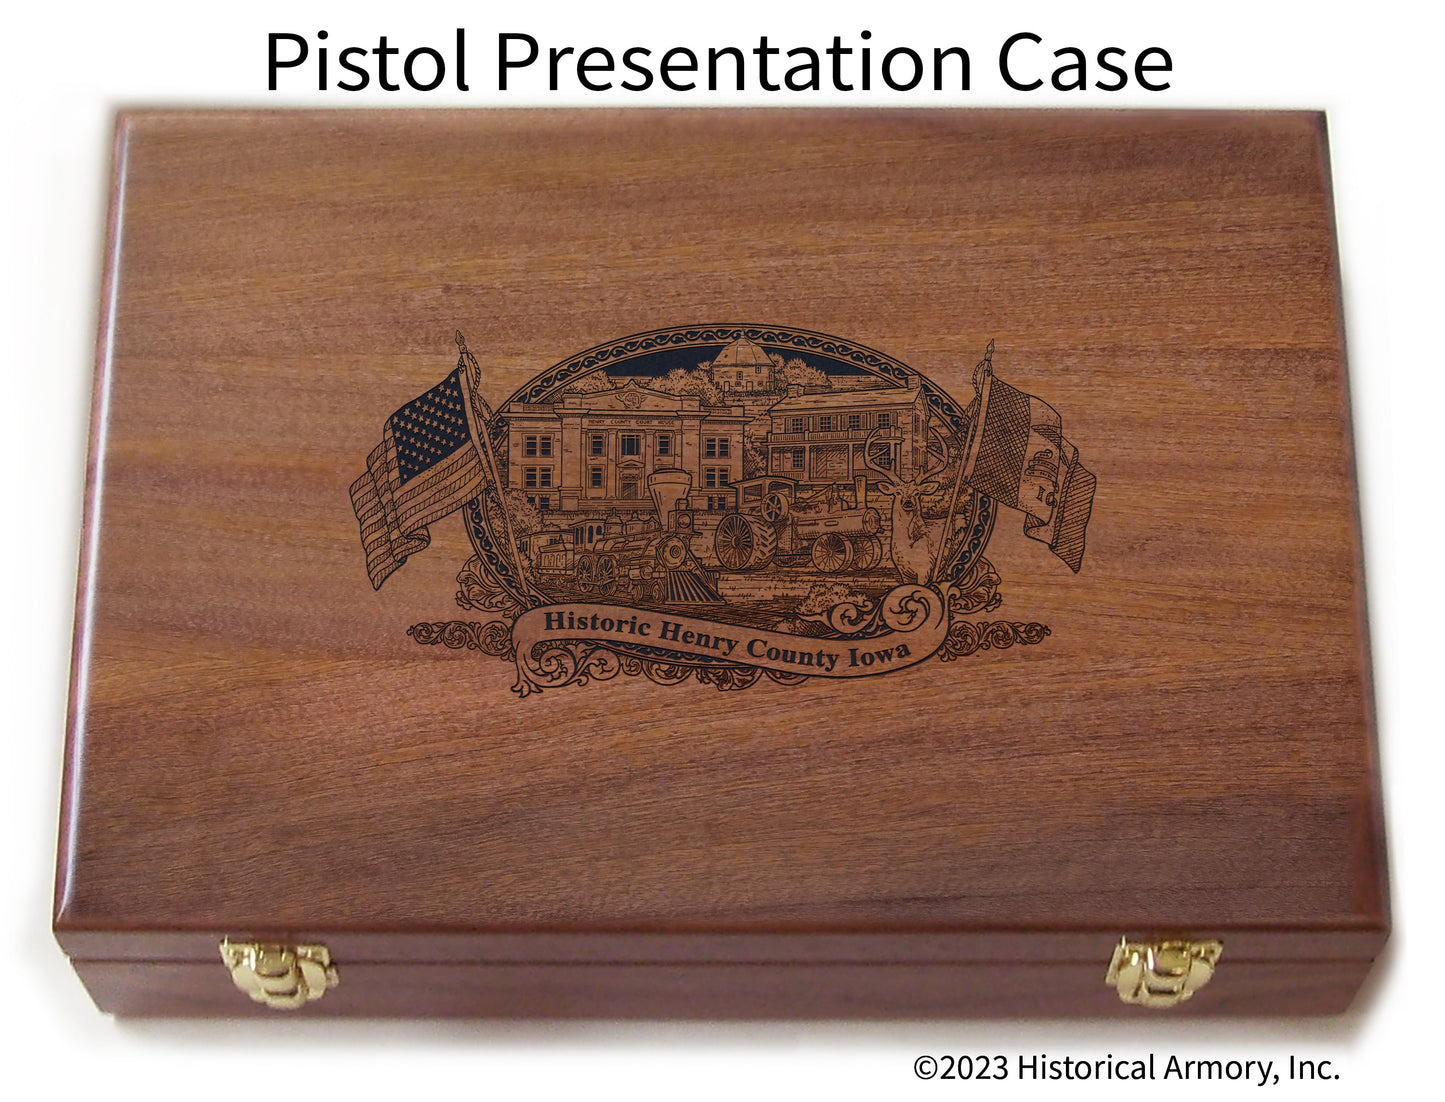 Henry County Iowa Engraved .45 Auto Ruger 1911 Presentation Case